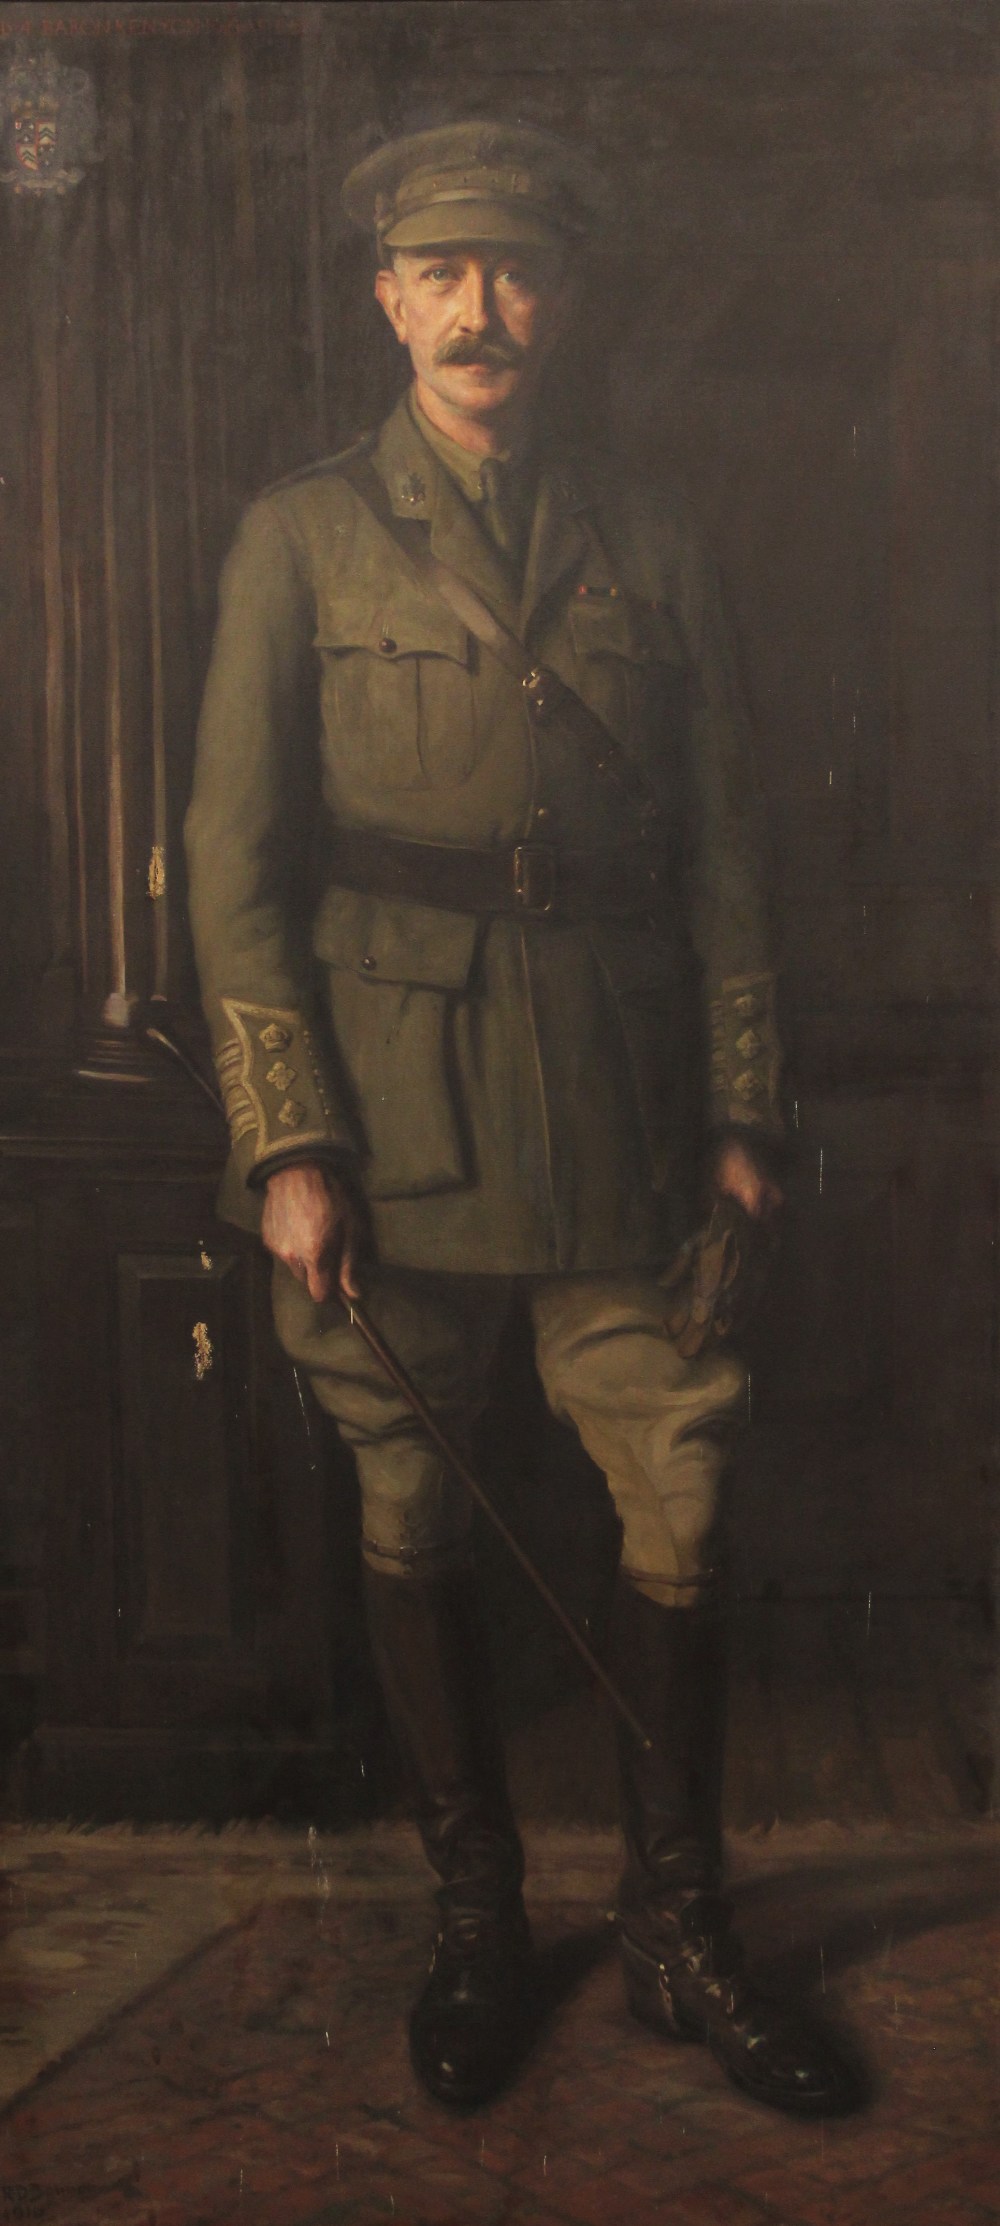 Rose Dempster Bonnor (fl.1895-1916), Portrait of Lloyd Tyrell Kenyon, 4th Bt, in the uniform of a - Image 3 of 12